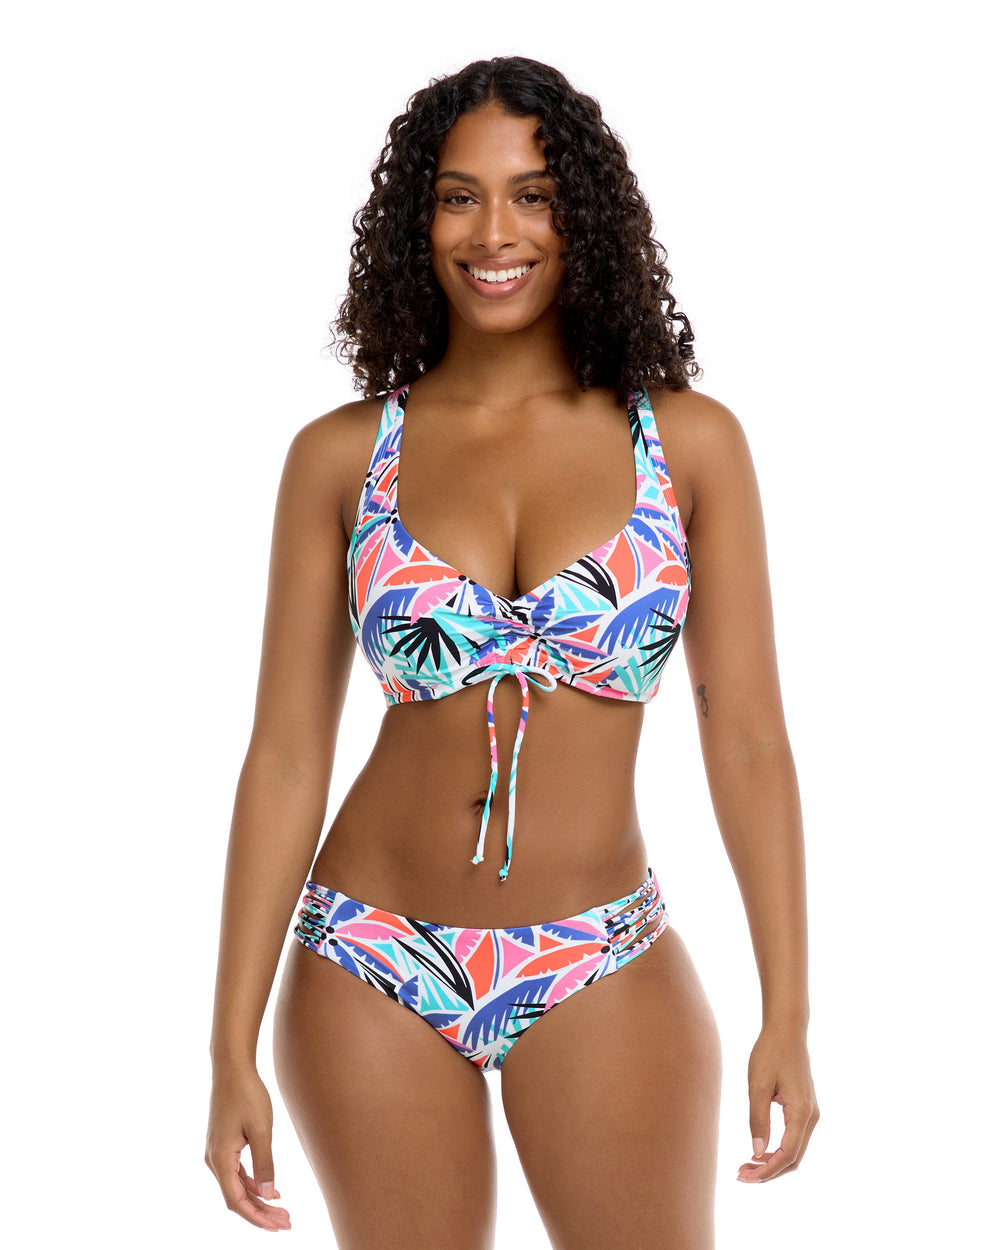 Adding Bust Support to a Swimsuit: Boning & Cups